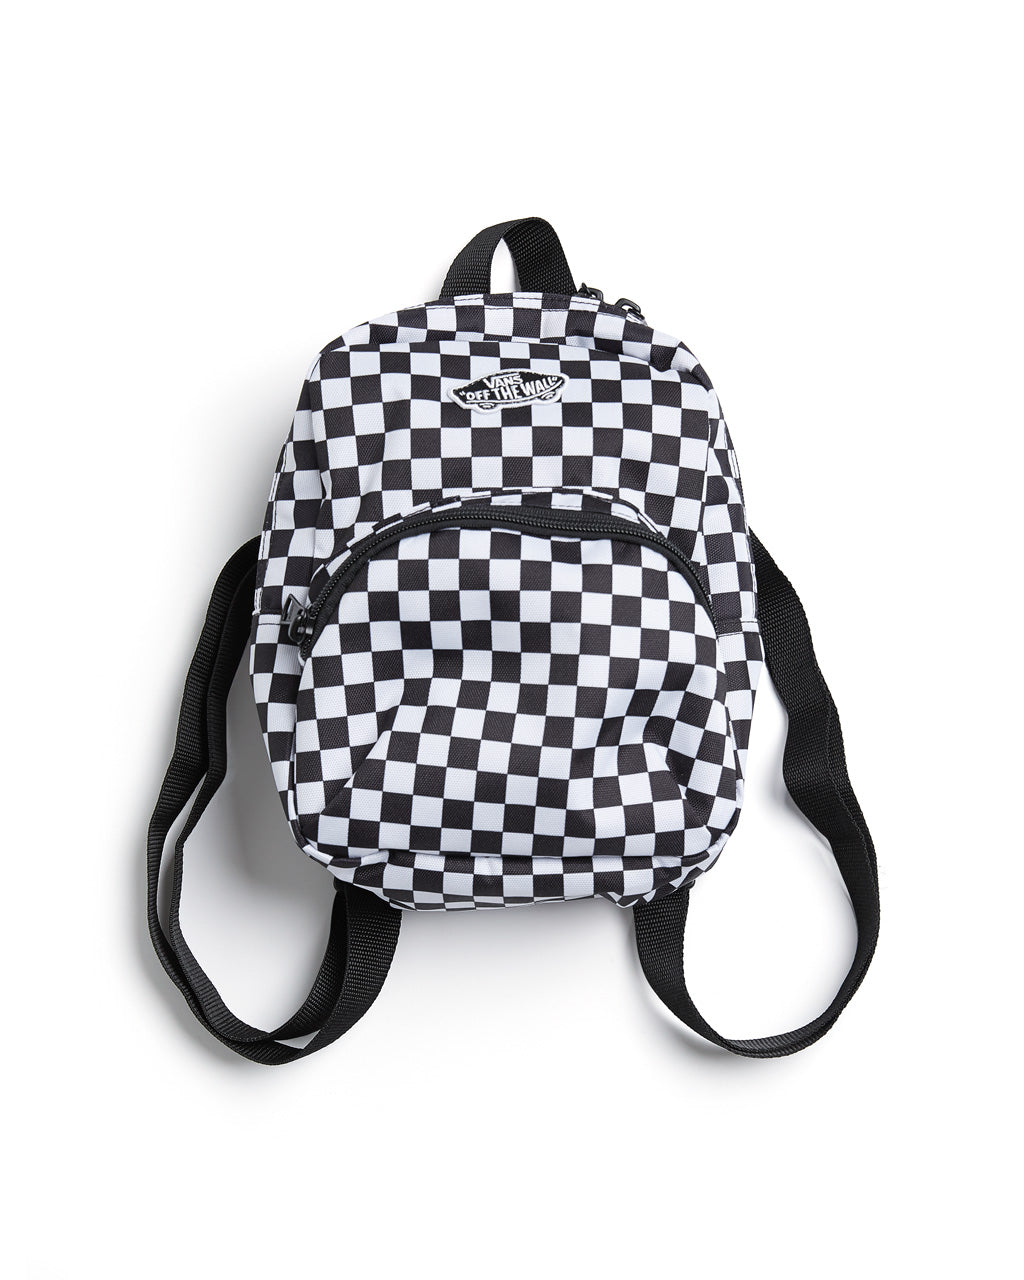 Got This Mini Backpack - Checkerboard by vans - backpack - www.bagsaleusa.com/product-category/belts/